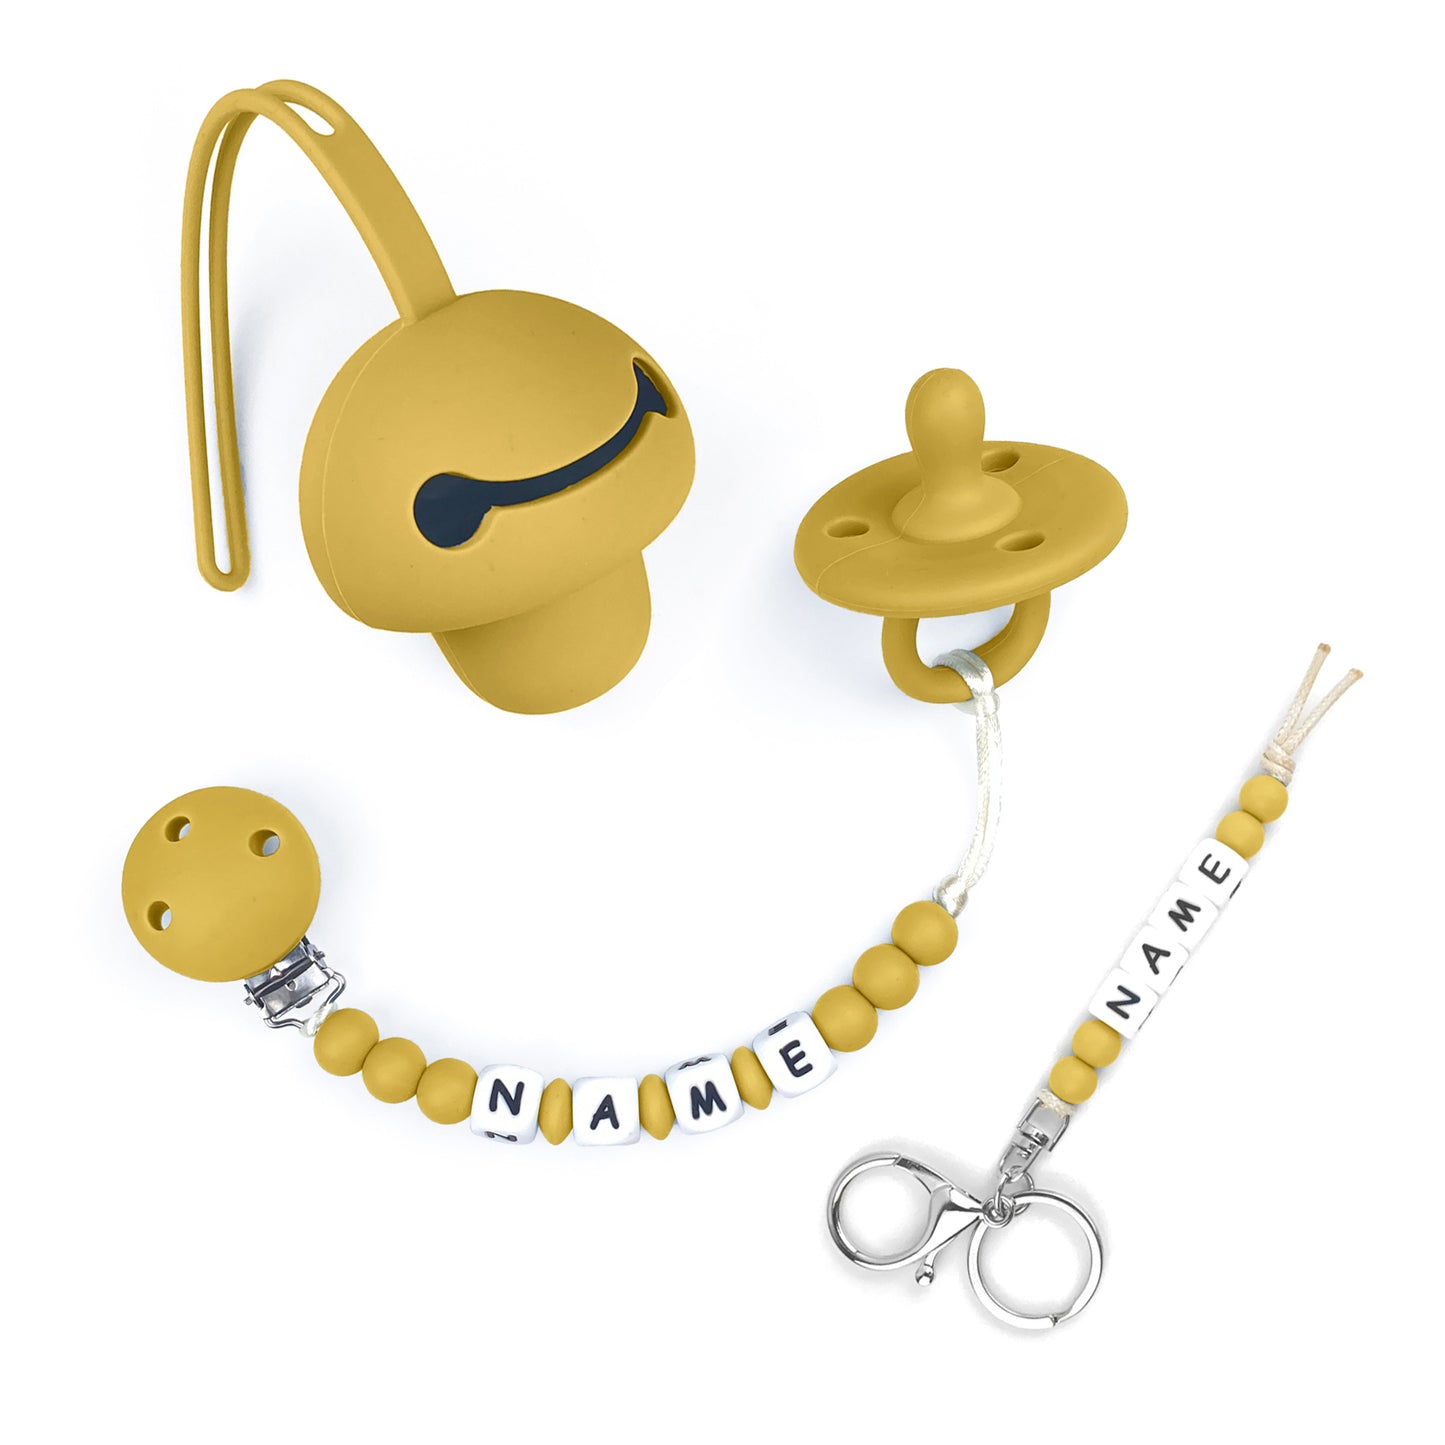 Customized Chain With Pacifier, Key Chain`& Pacifier Case